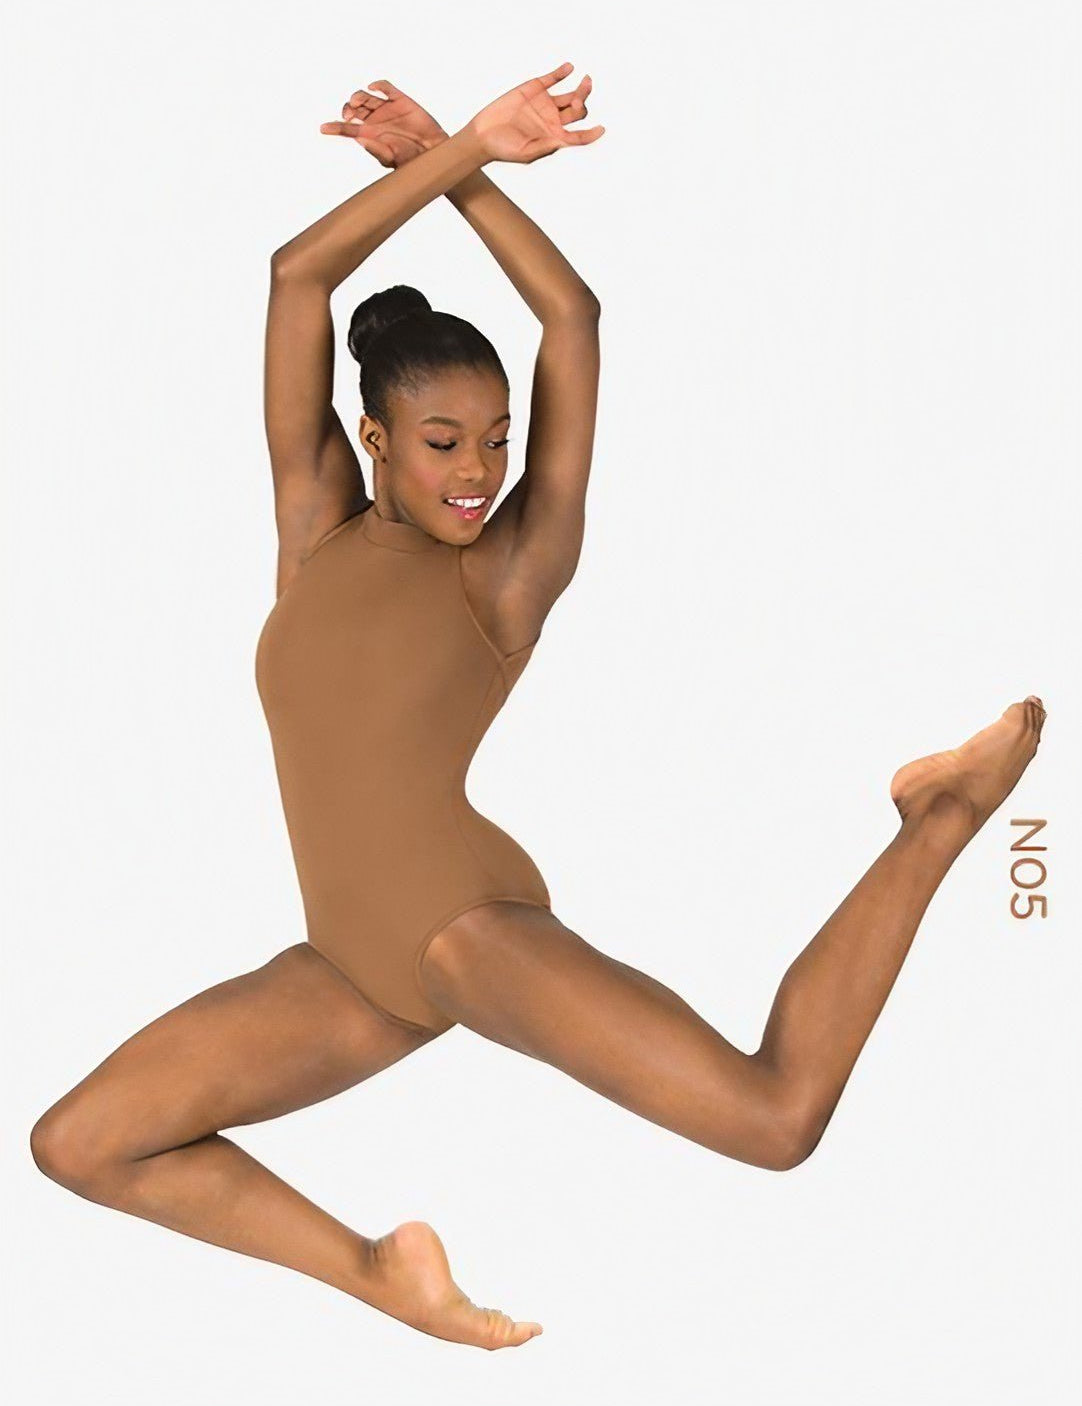 A young African American woman wearing a high neck tank leotard